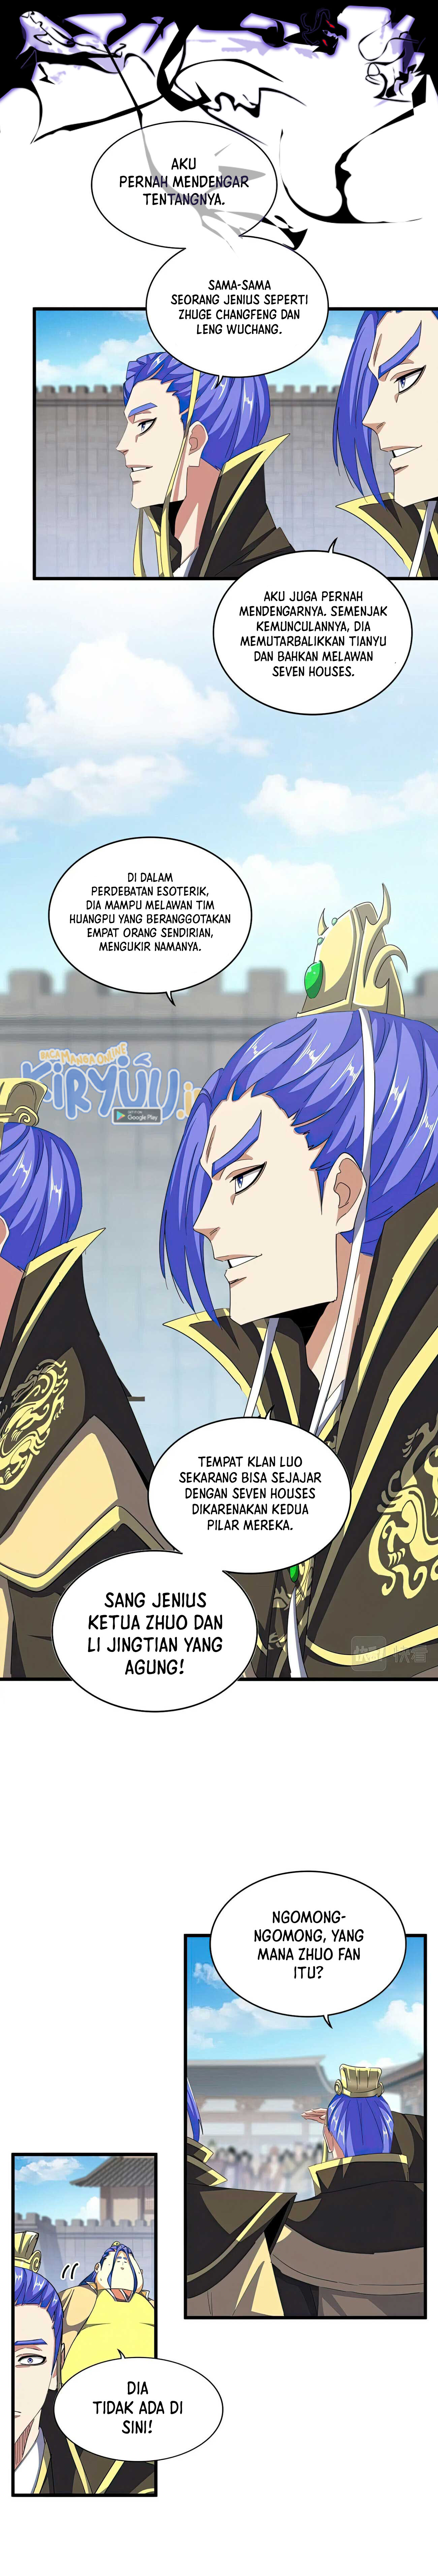 Magic Emperor Chapter 381 Image 1